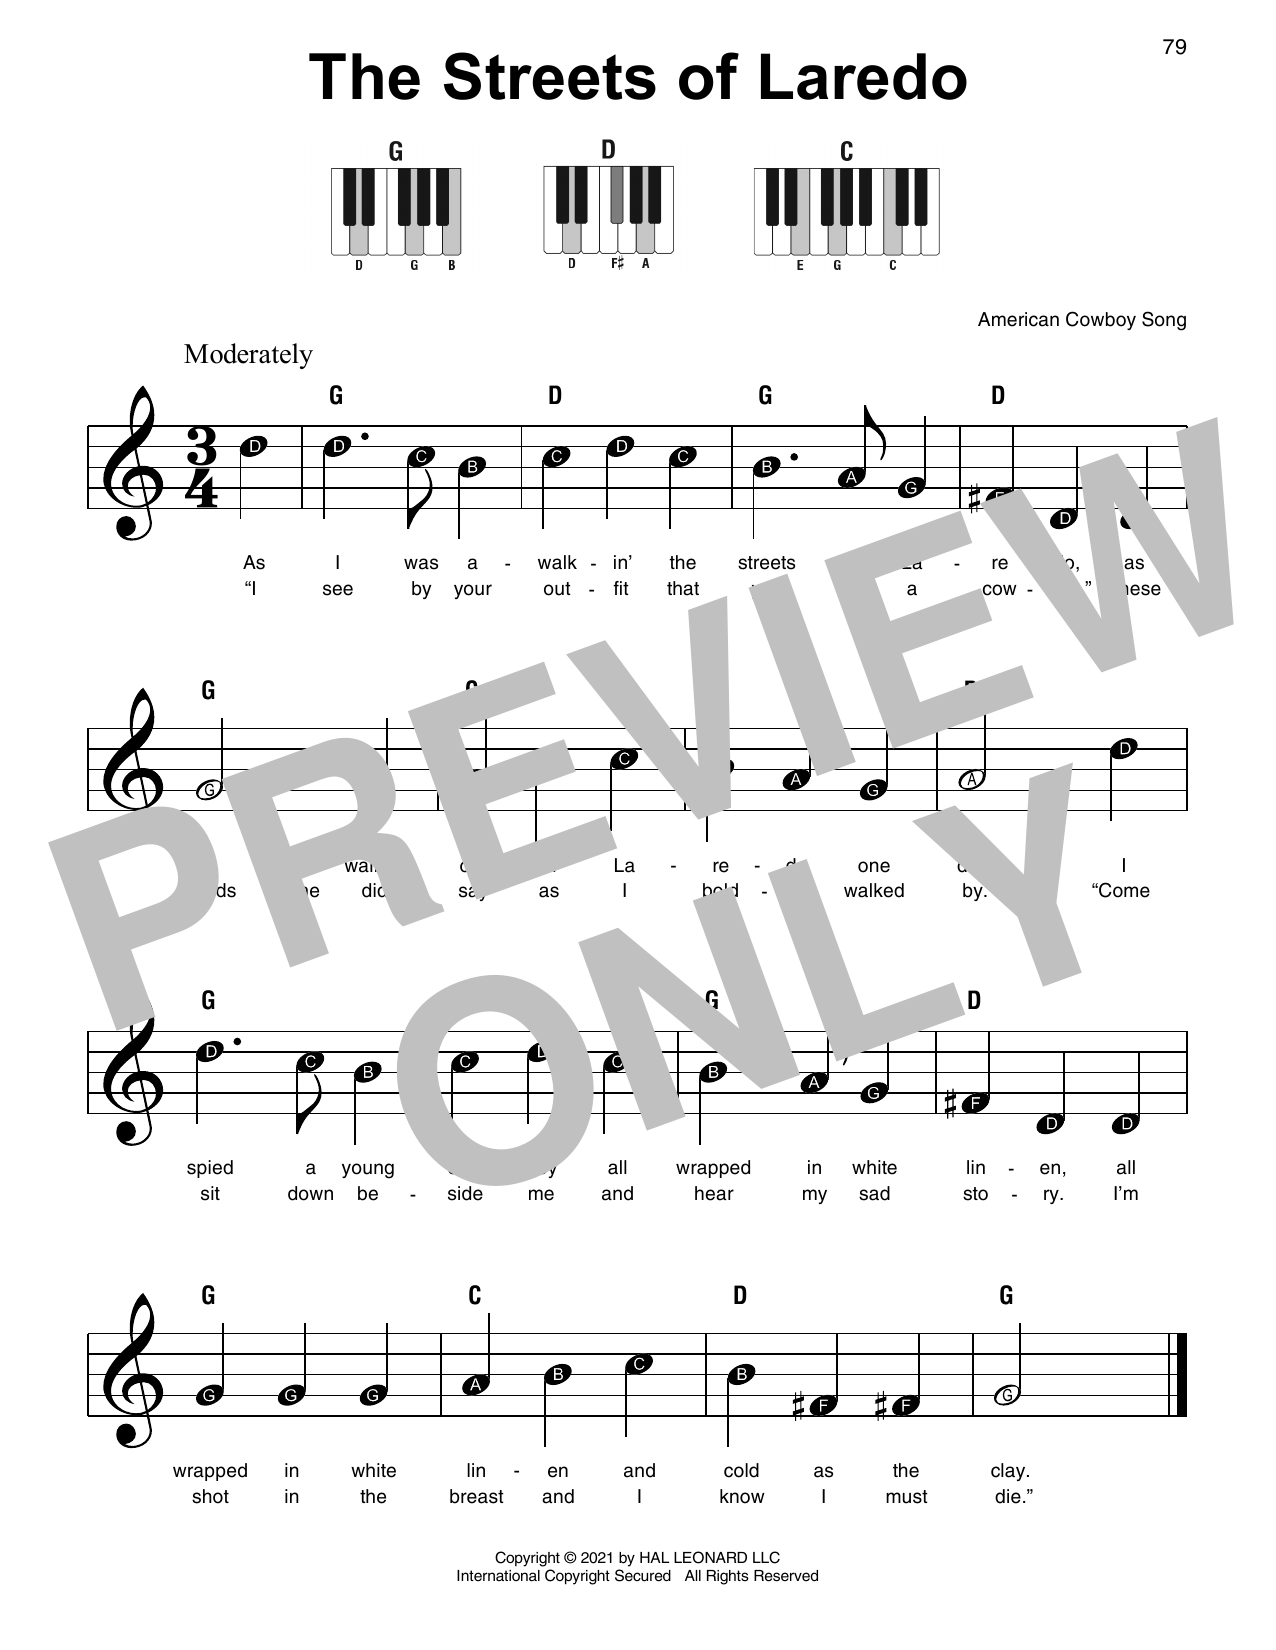 Download American Cowboy Song The Streets Of Laredo Sheet Music